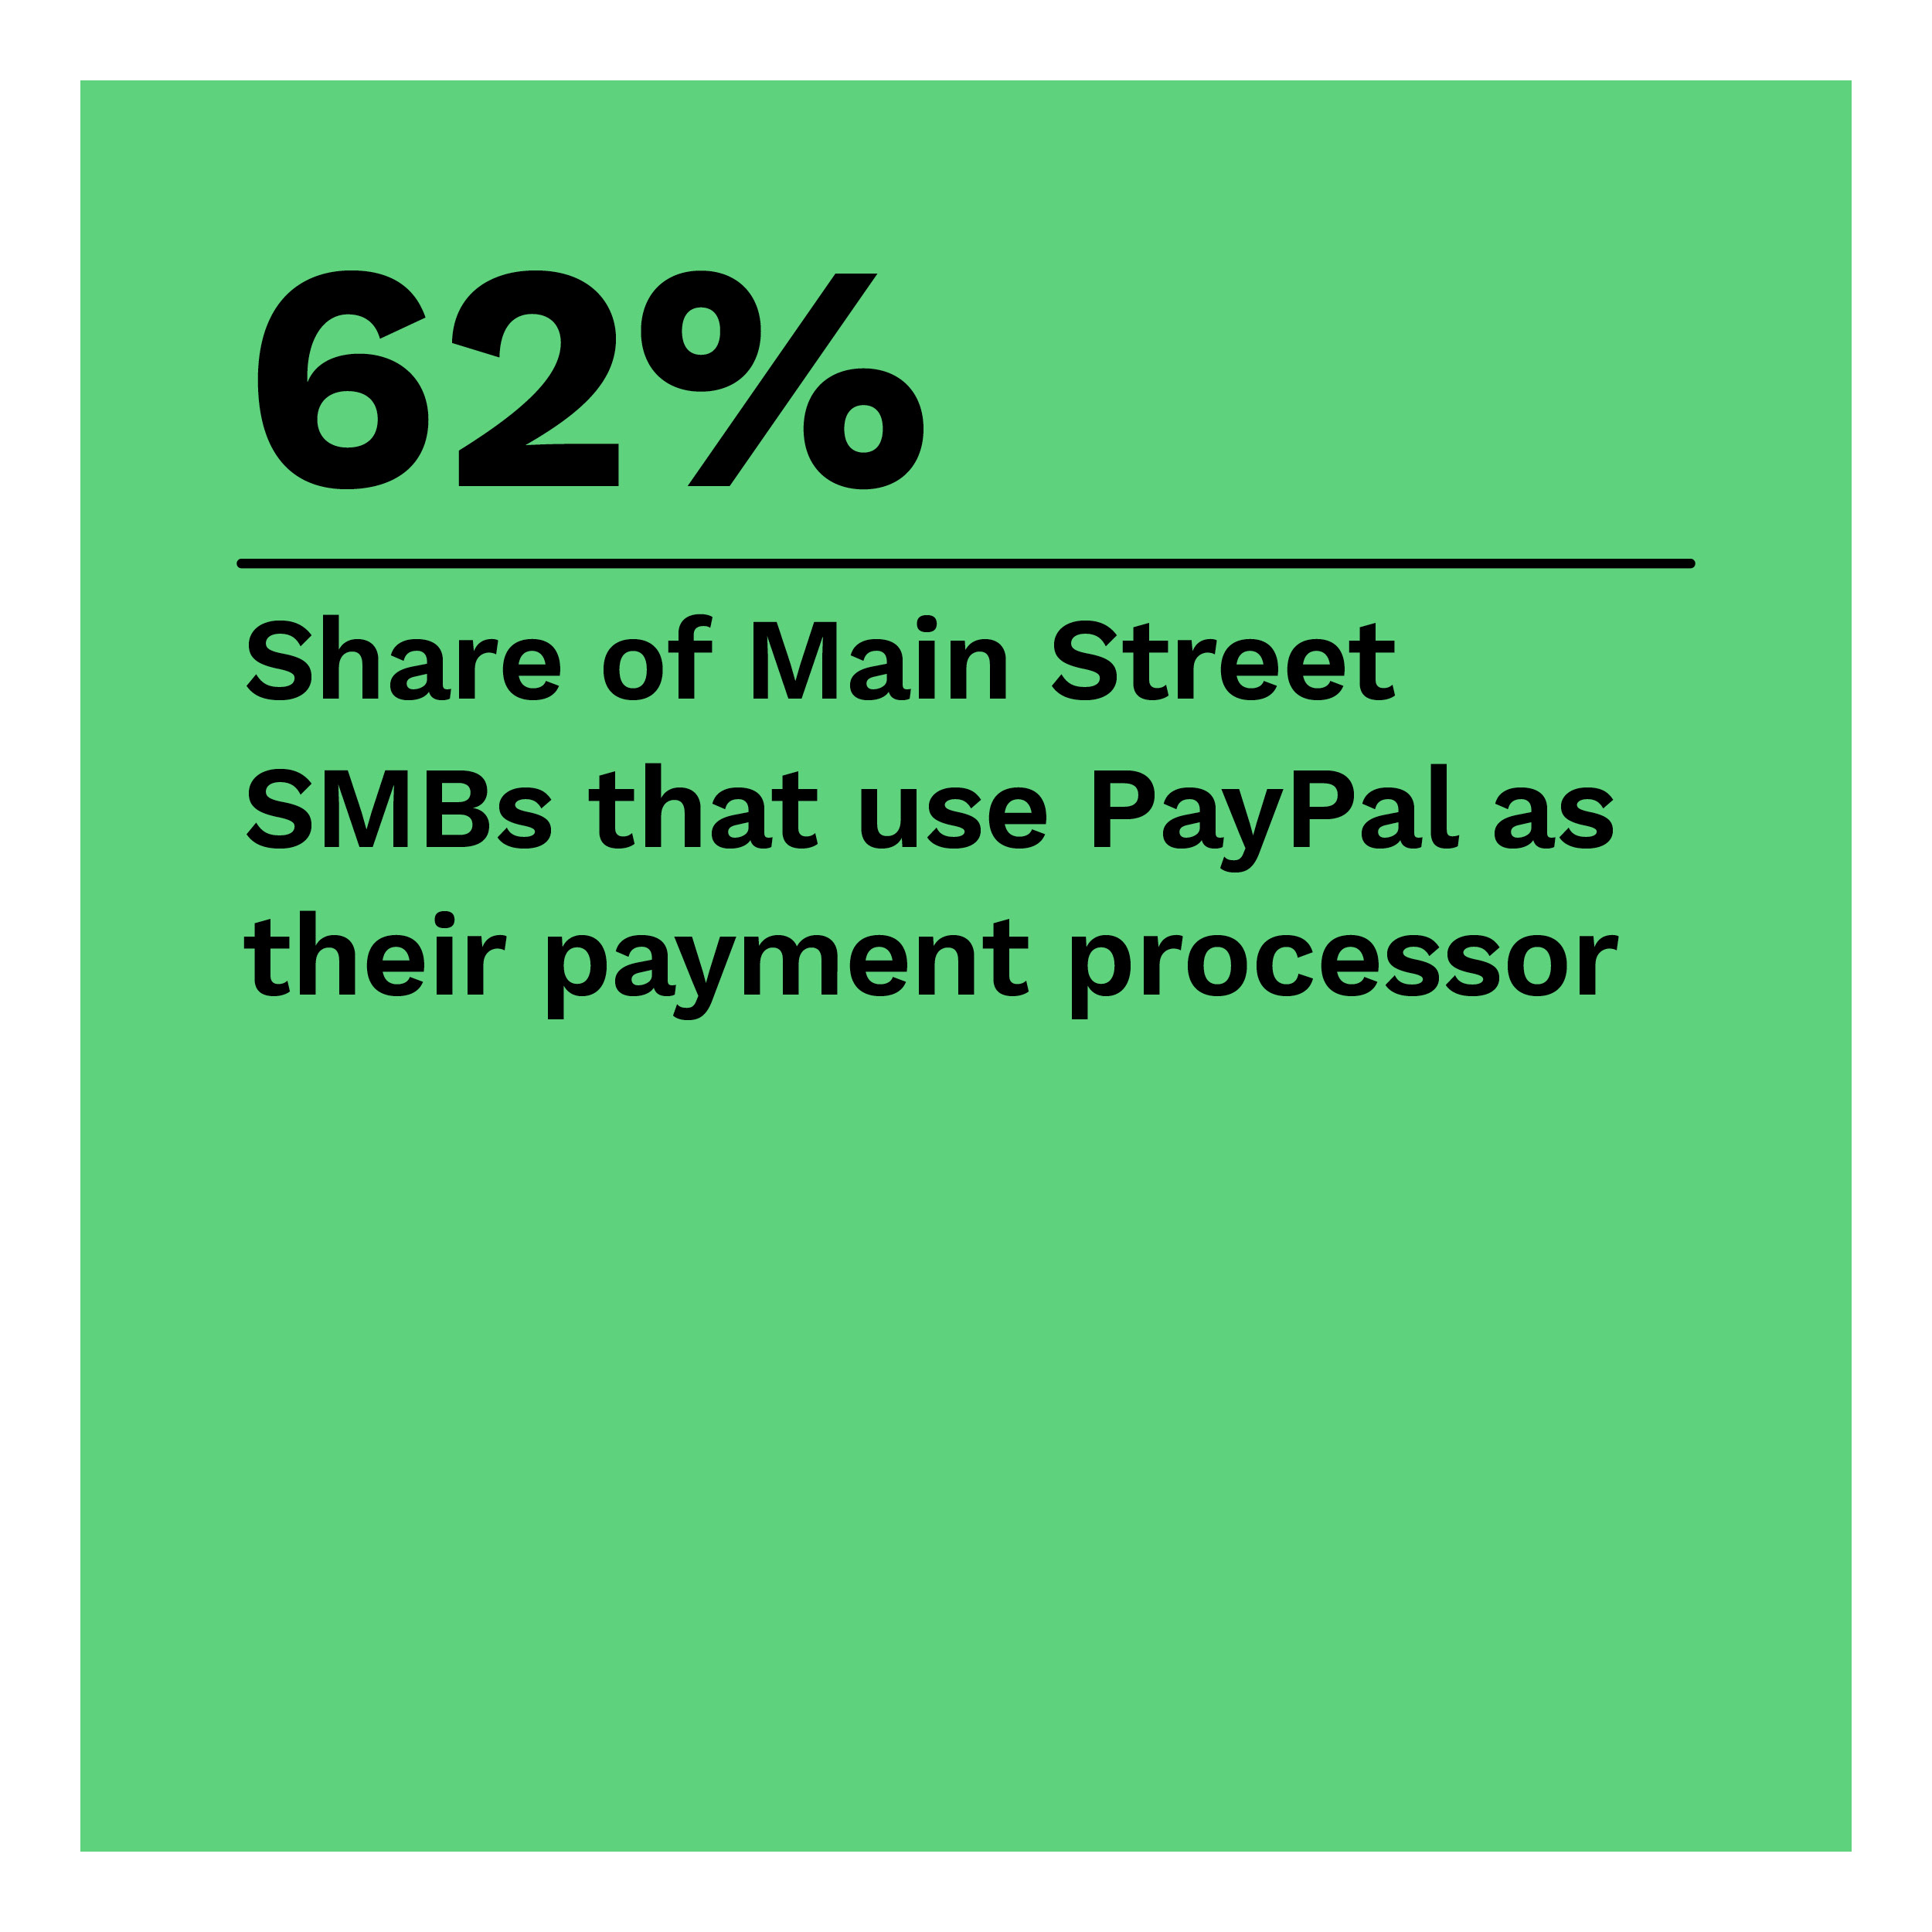 62%: Share of Main Street SMBs that use PayPal as their payment processor